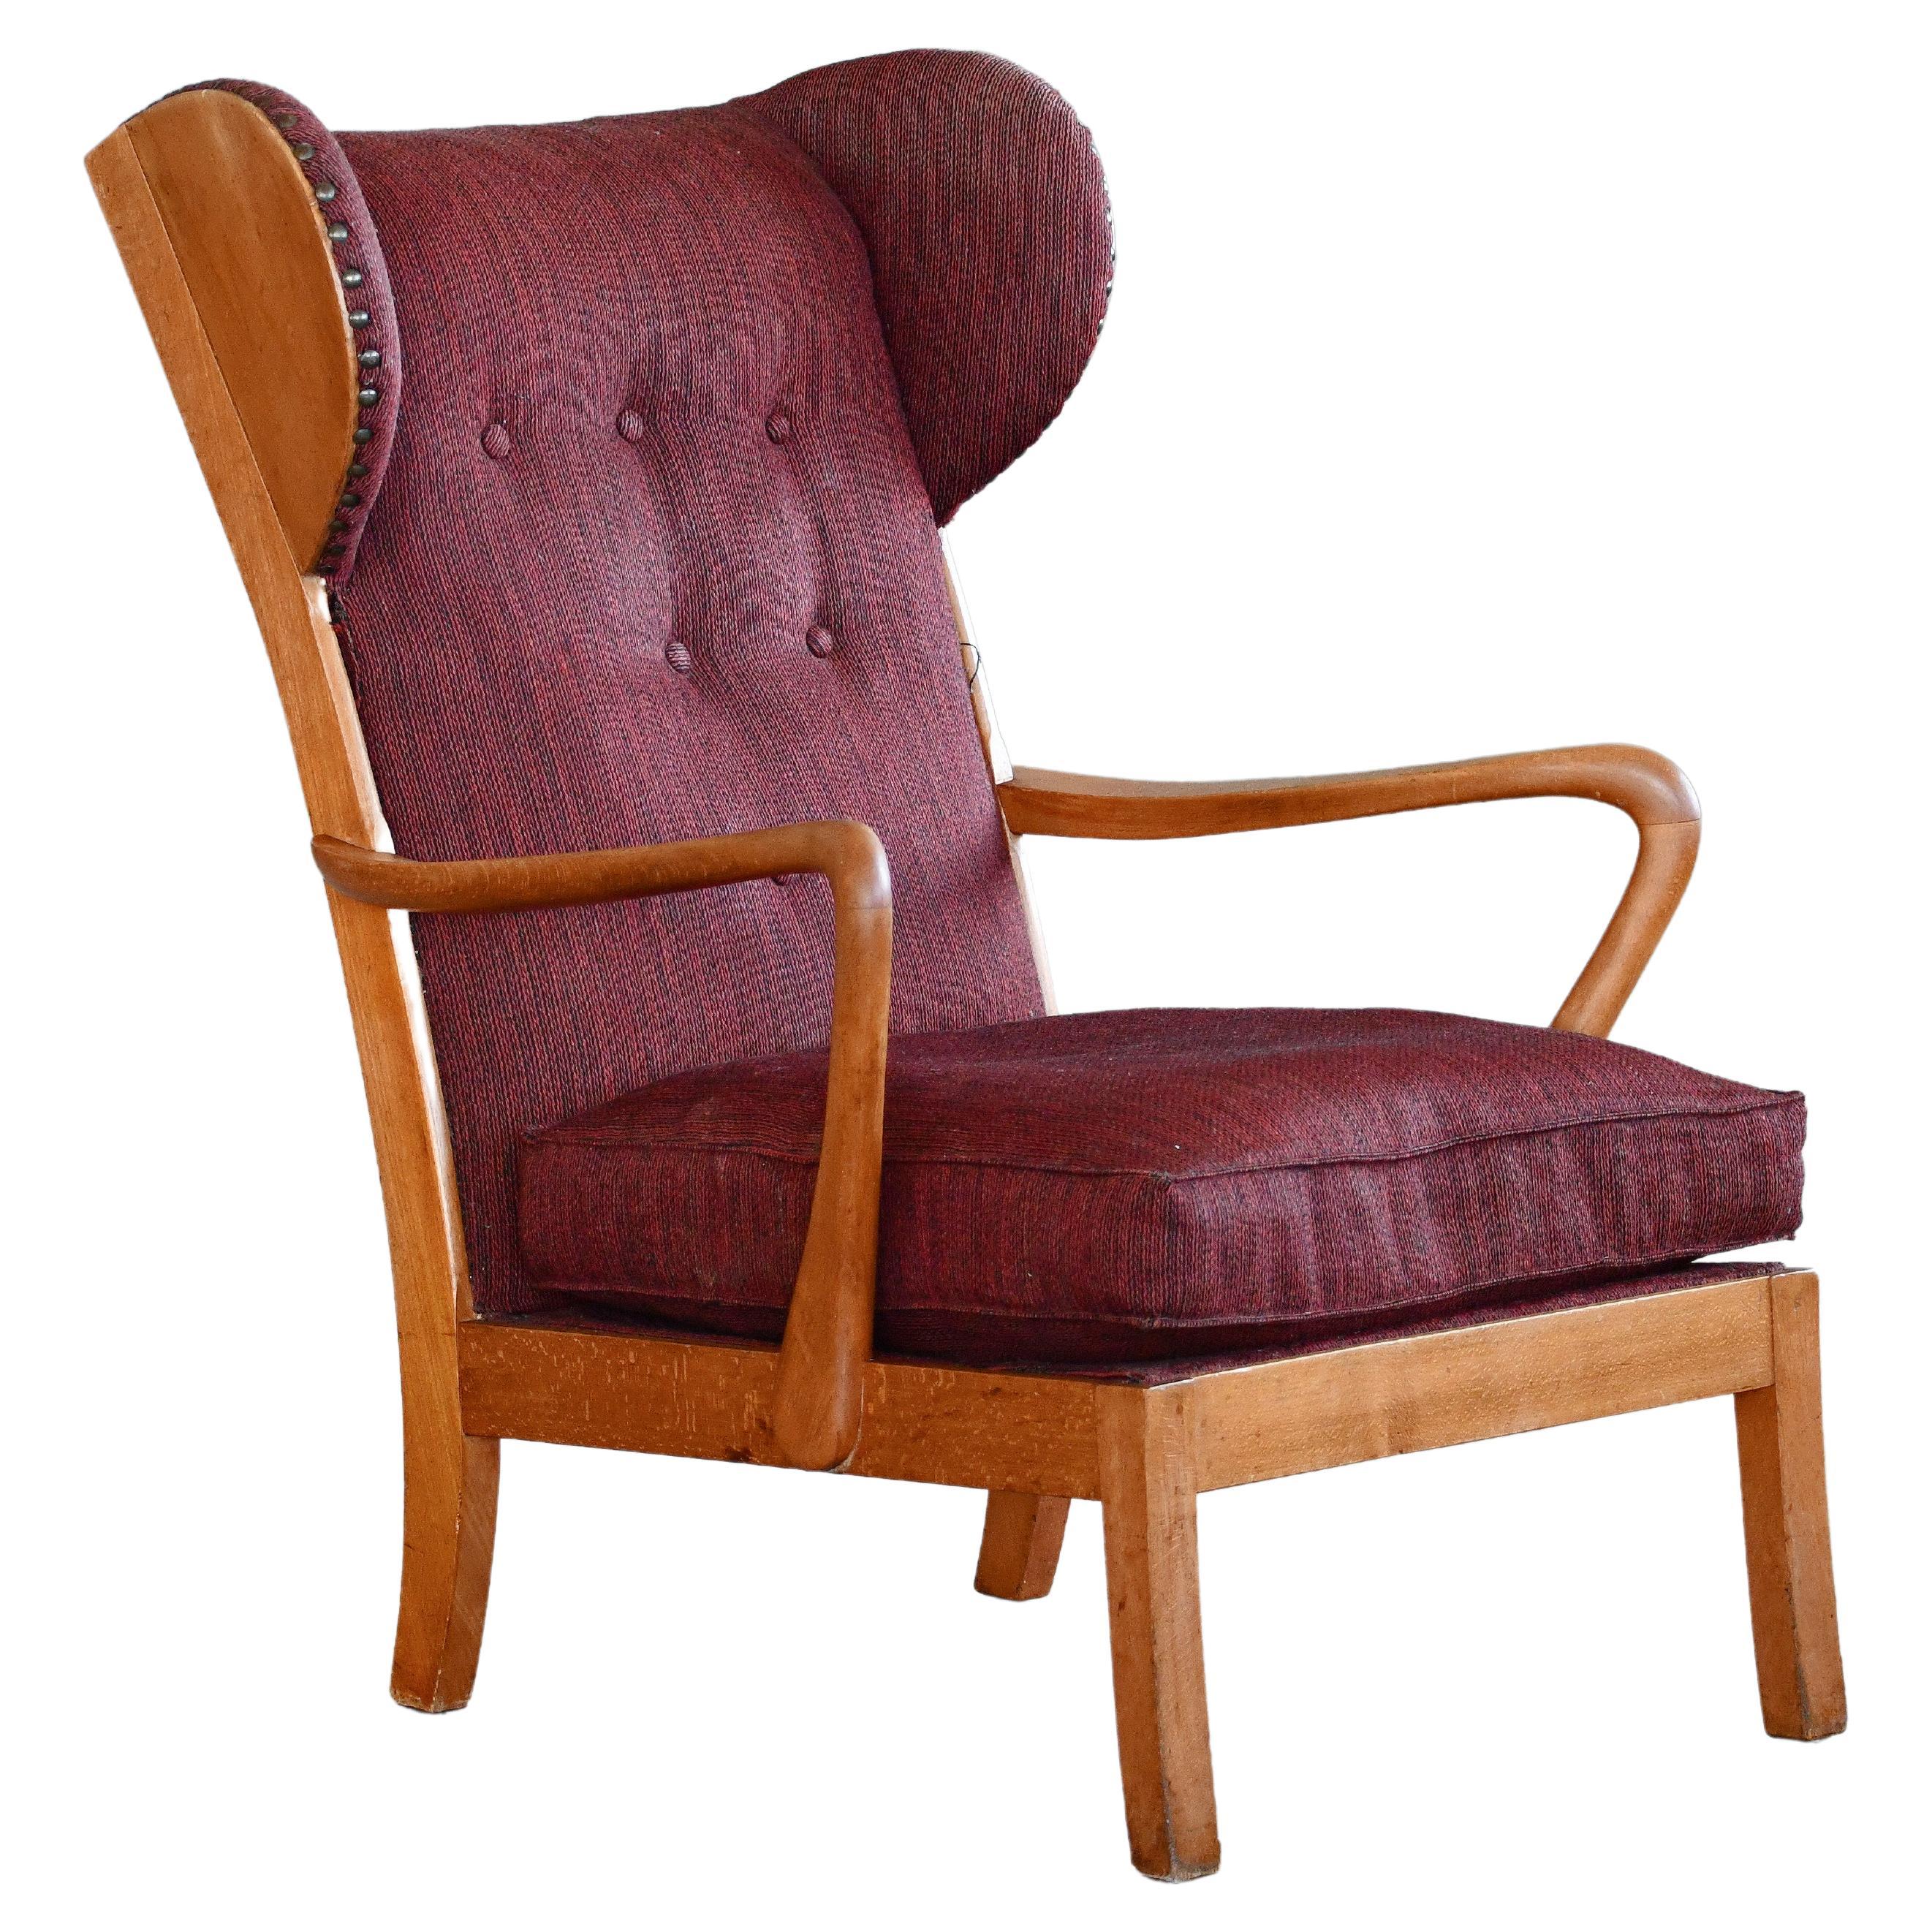 Danish Modern 1950s Highback Lounge Wing Chair With Wooden Wings For Sale